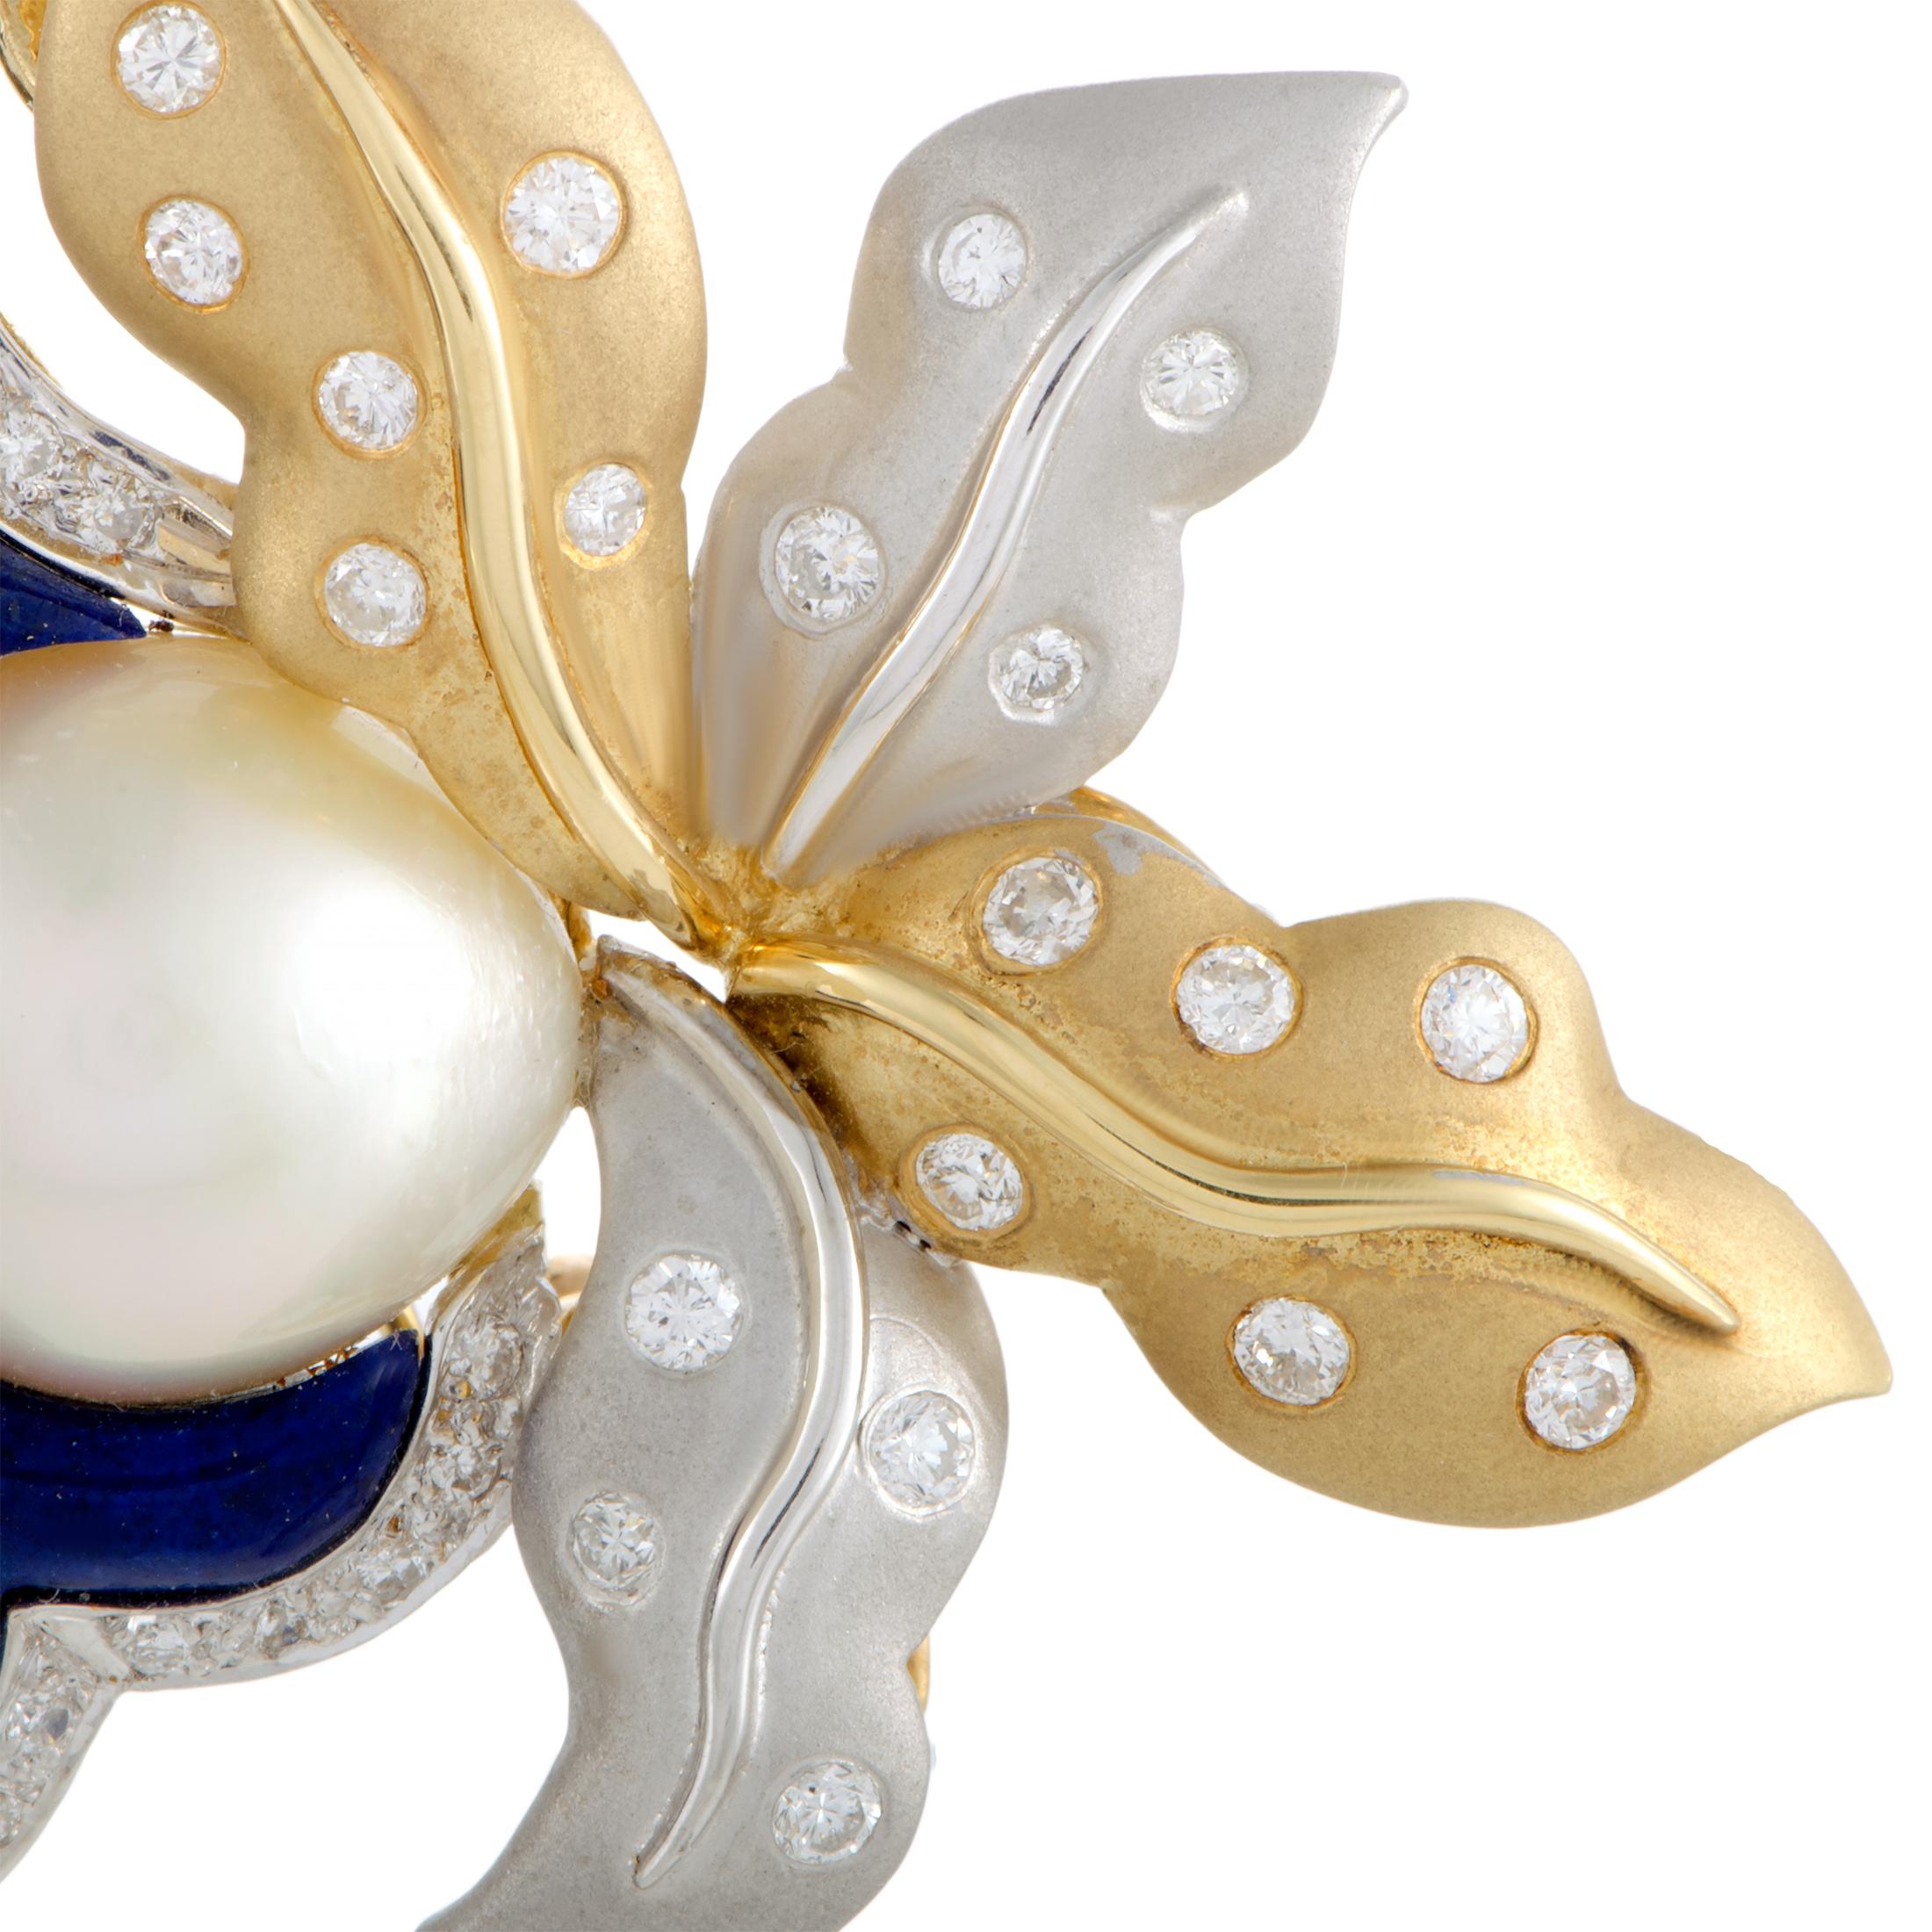 A majestic composition of gracefully smooth shapes, delightfully joyous colors, and charming luxurious radiance, this fabulous brooch is made of 18K yellow and white gold and embellished with a gorgeous twin pearl, splendid lapis lazuli, and